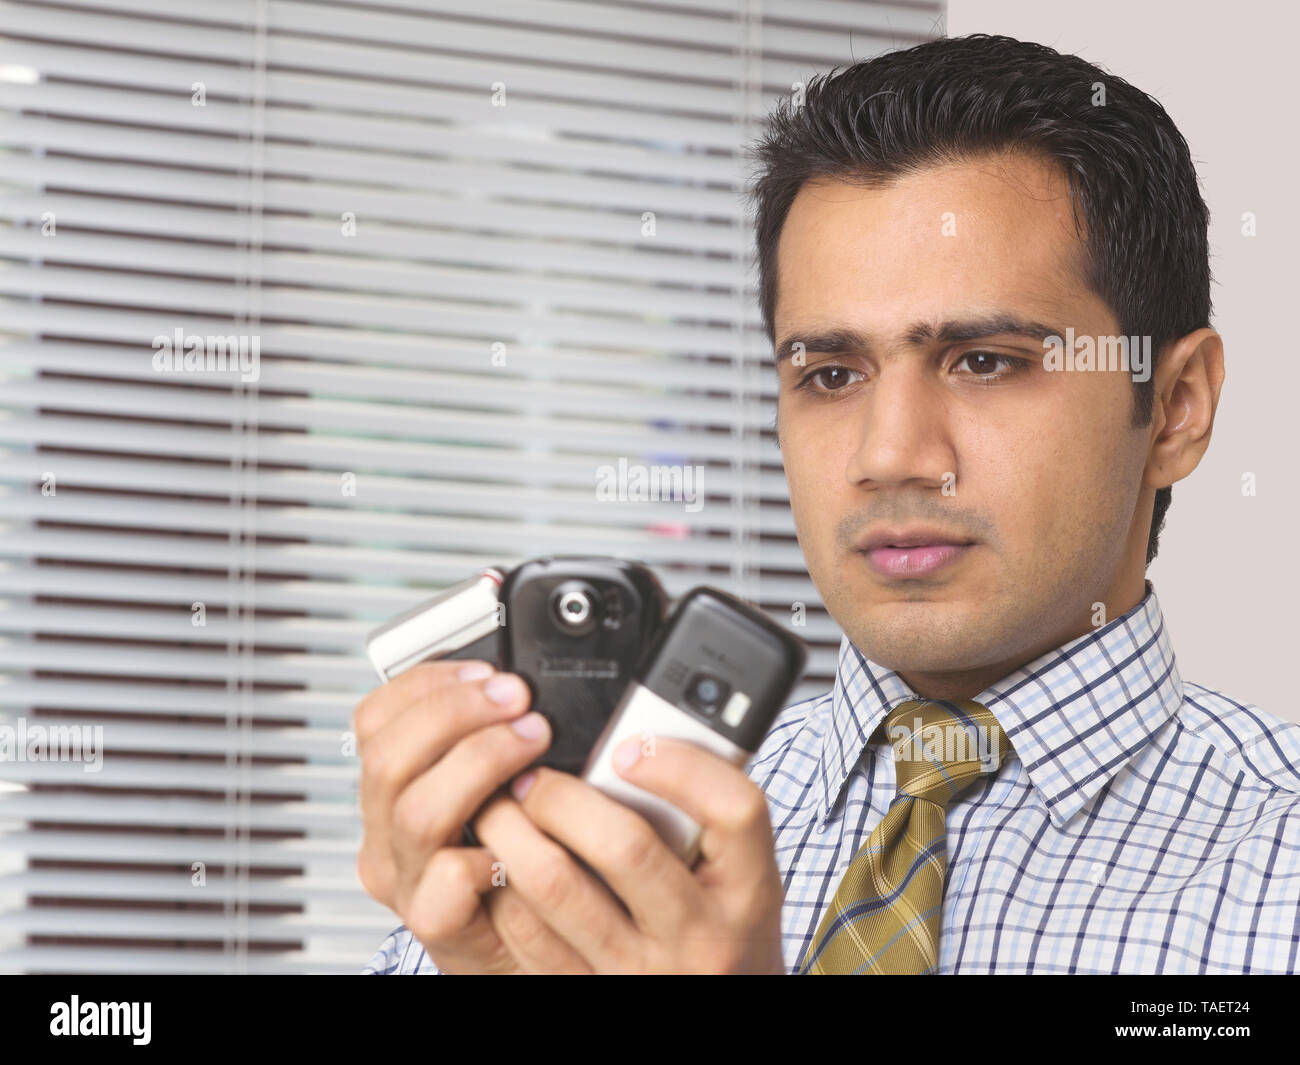 MAN HOLDING MULTIPLE MOBILE PHONES IN HIS HANDS Stock Photo